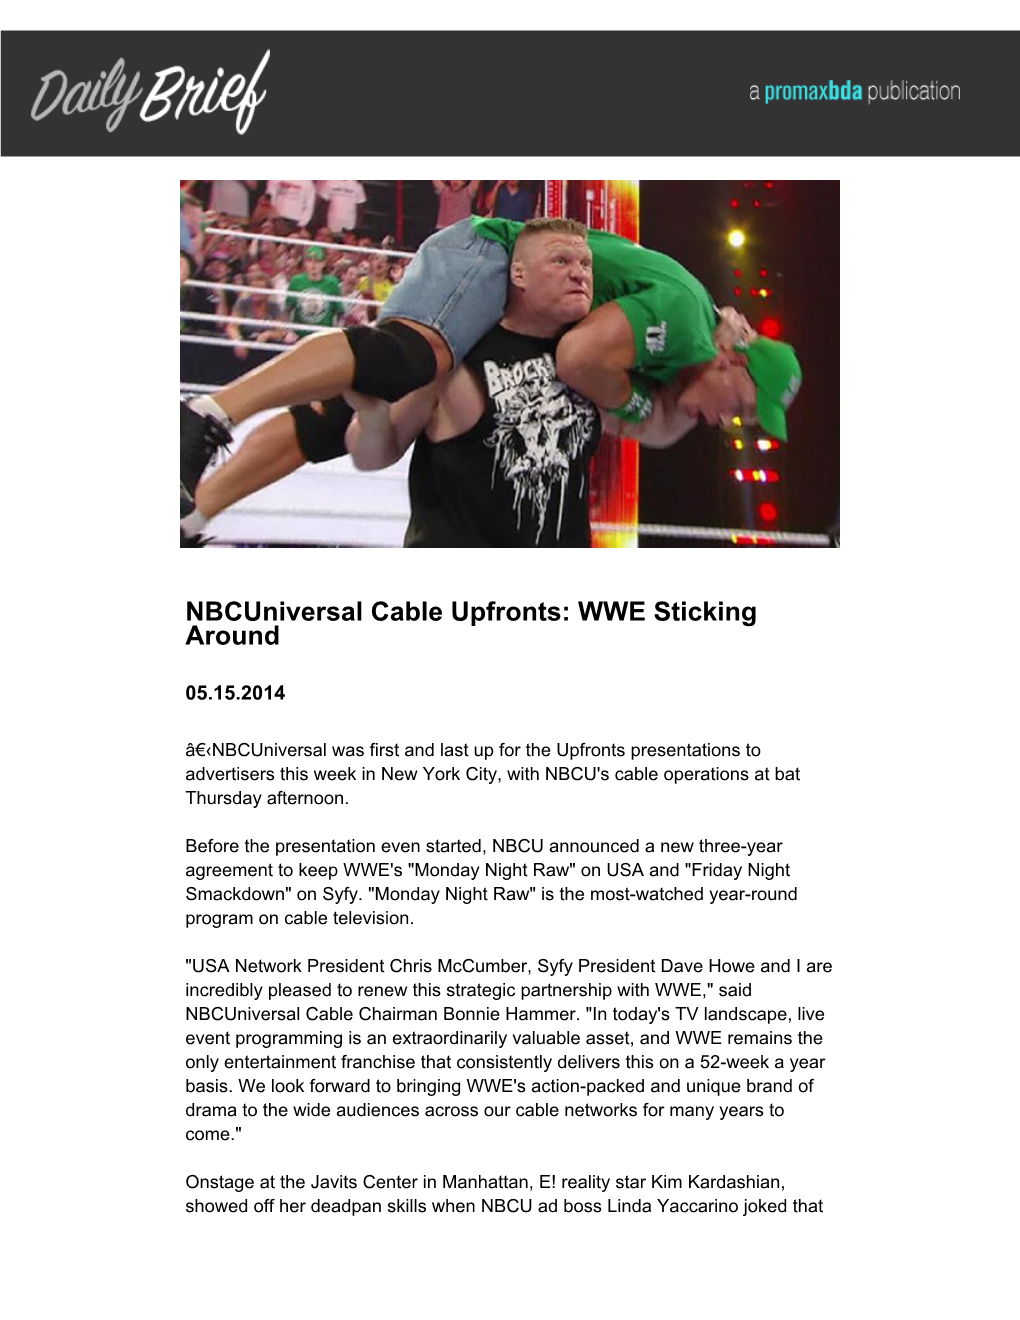 Nbcuniversal Cable Upfronts: WWE Sticking Around